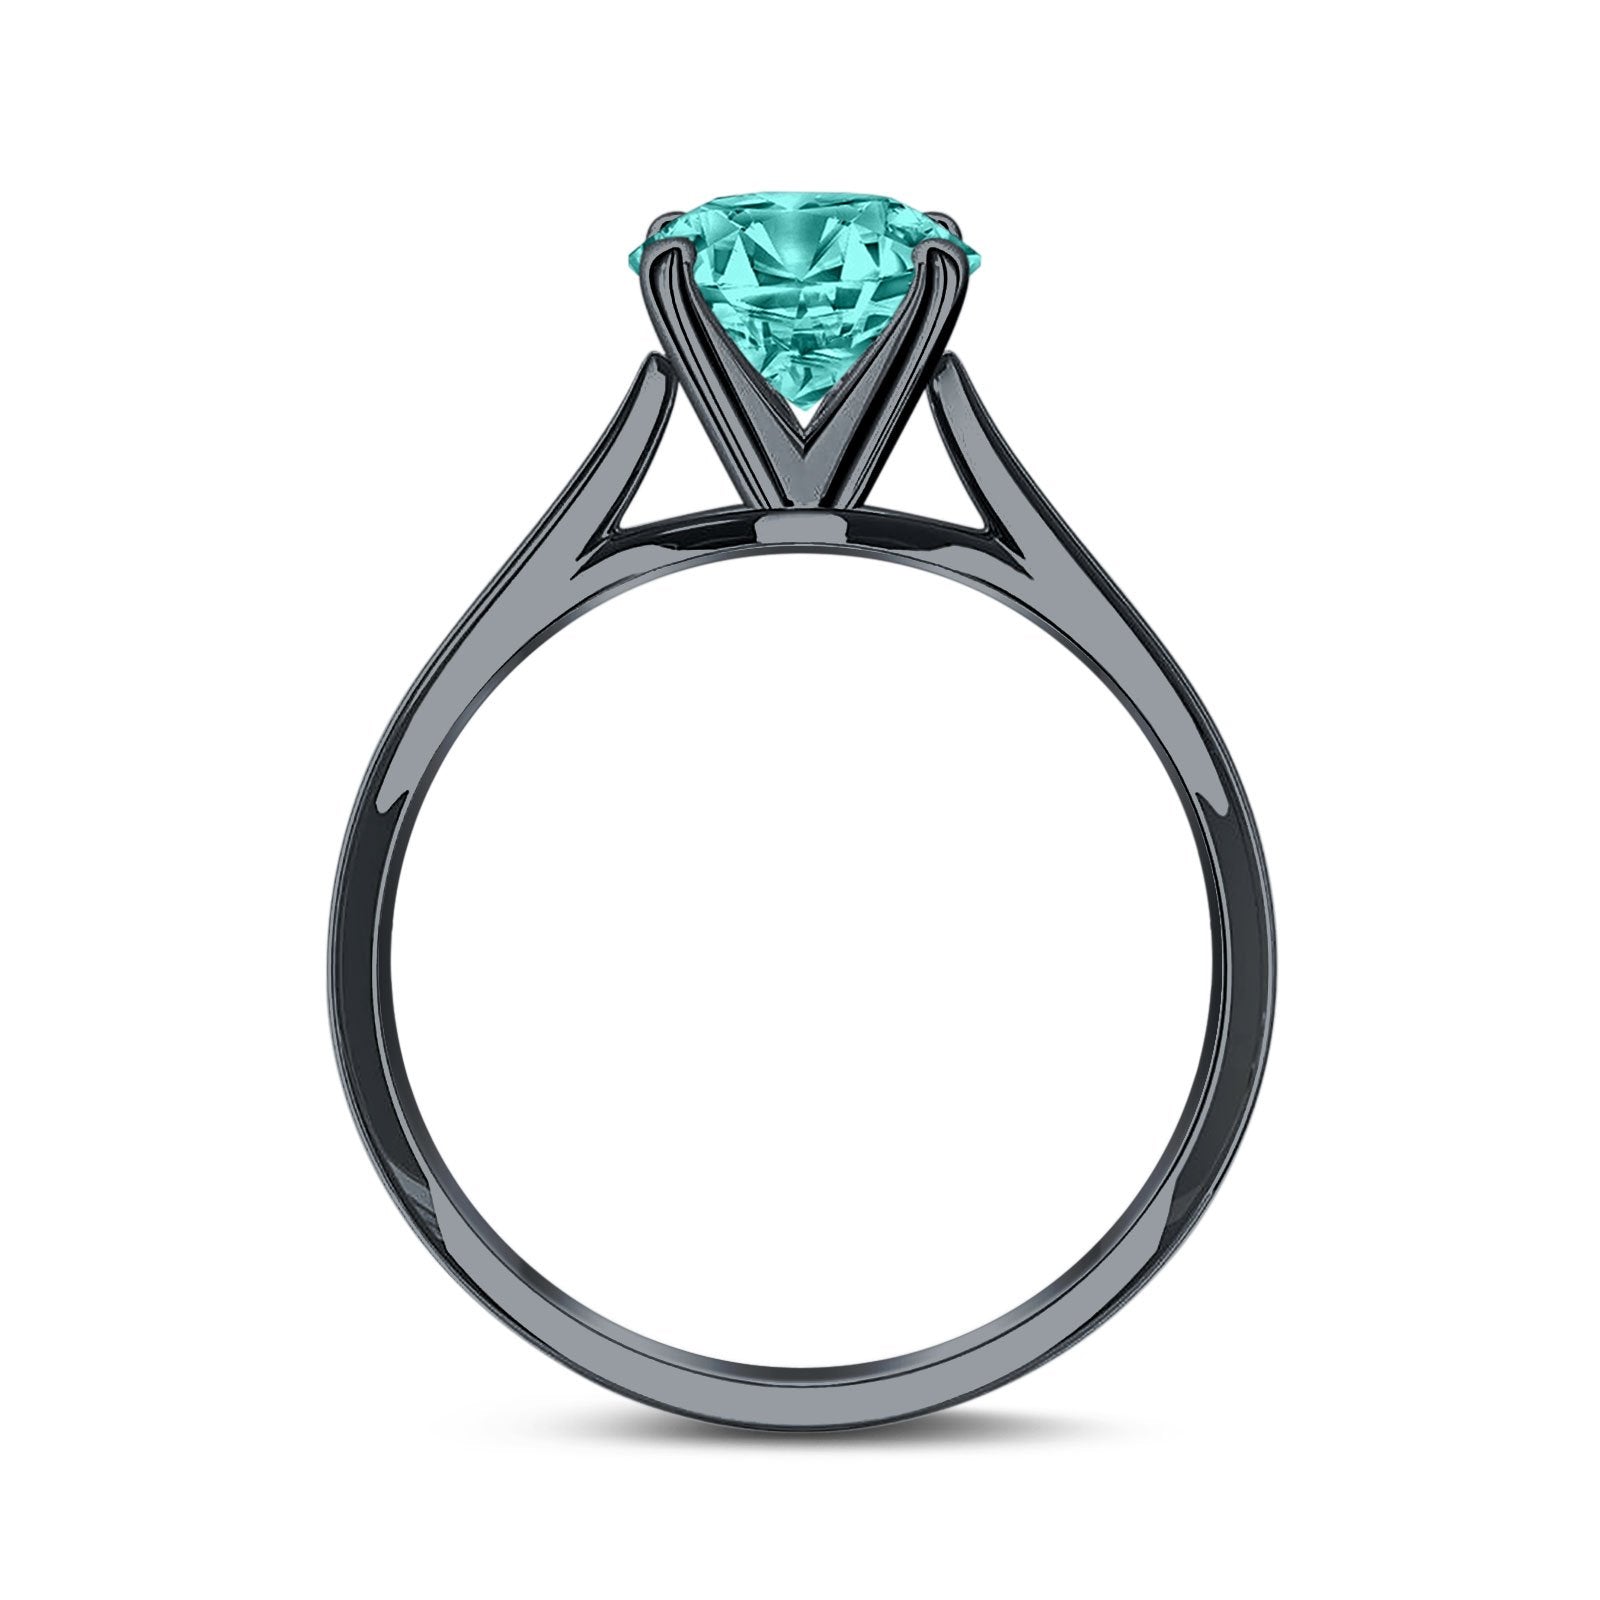 Solitaire Teardrop Black Tone, Simulated Paraiba Tourmaline CZ Wedding Ring 925 Sterling Silver Center Stone-(8mmx6mm)